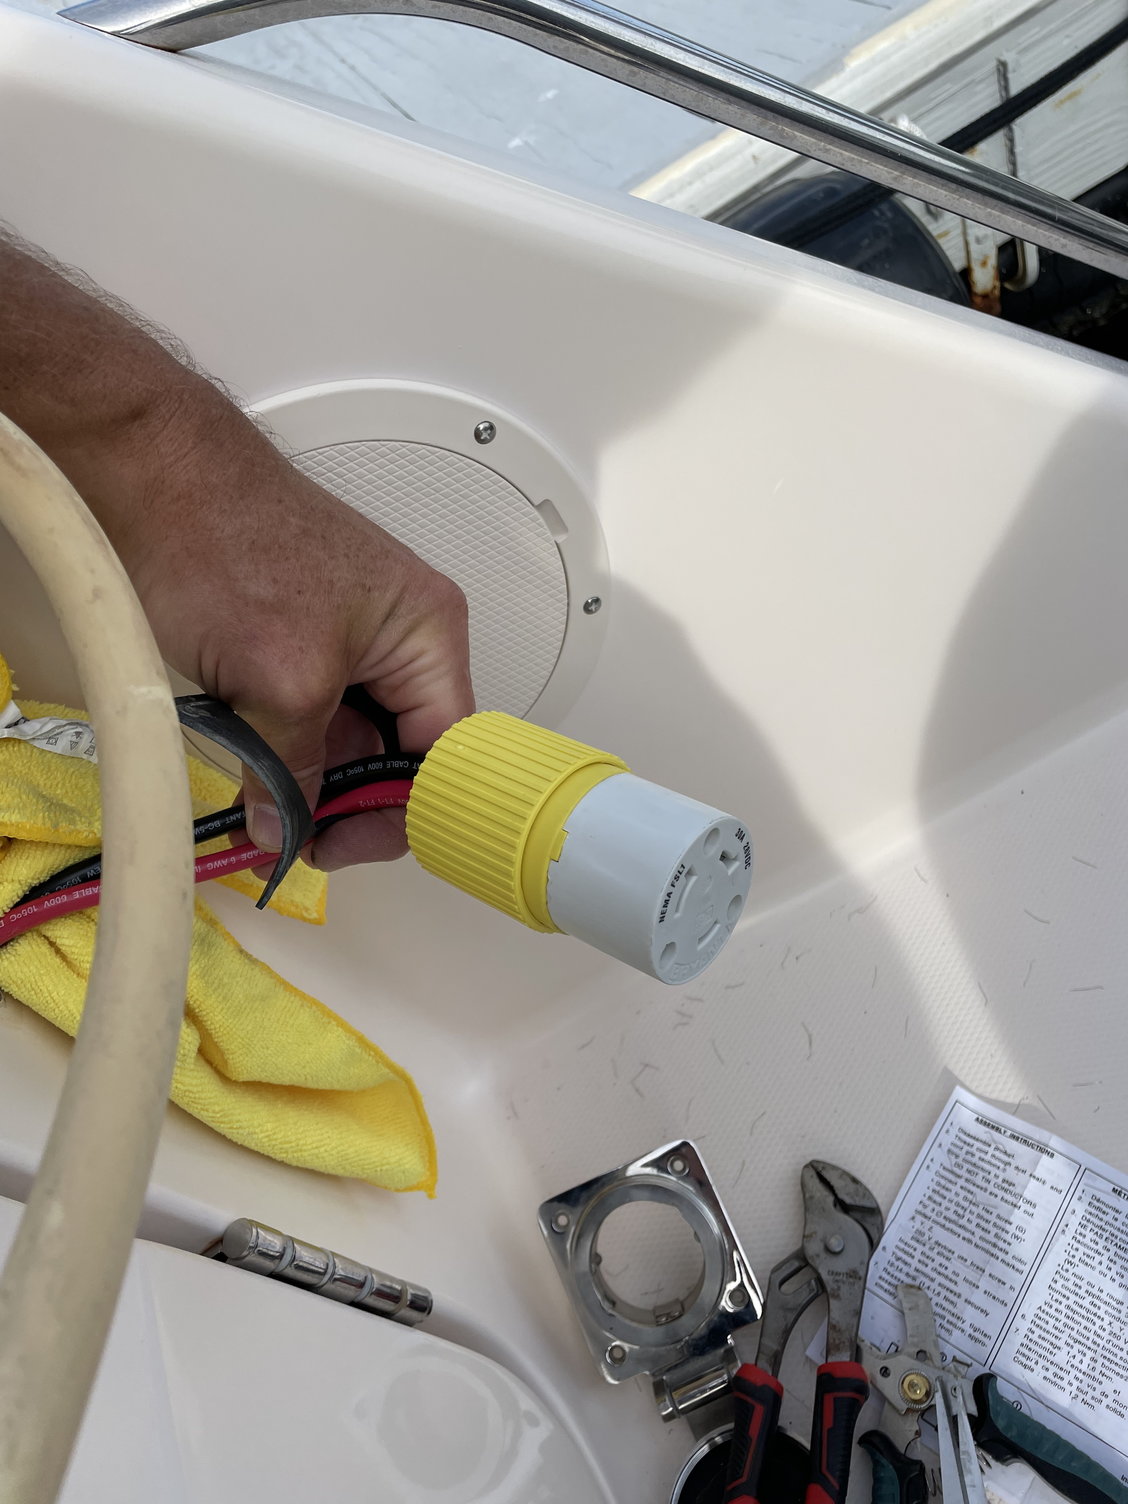 Installed 12V plug for Electric Reel? - The Hull Truth - Boating and Fishing  Forum